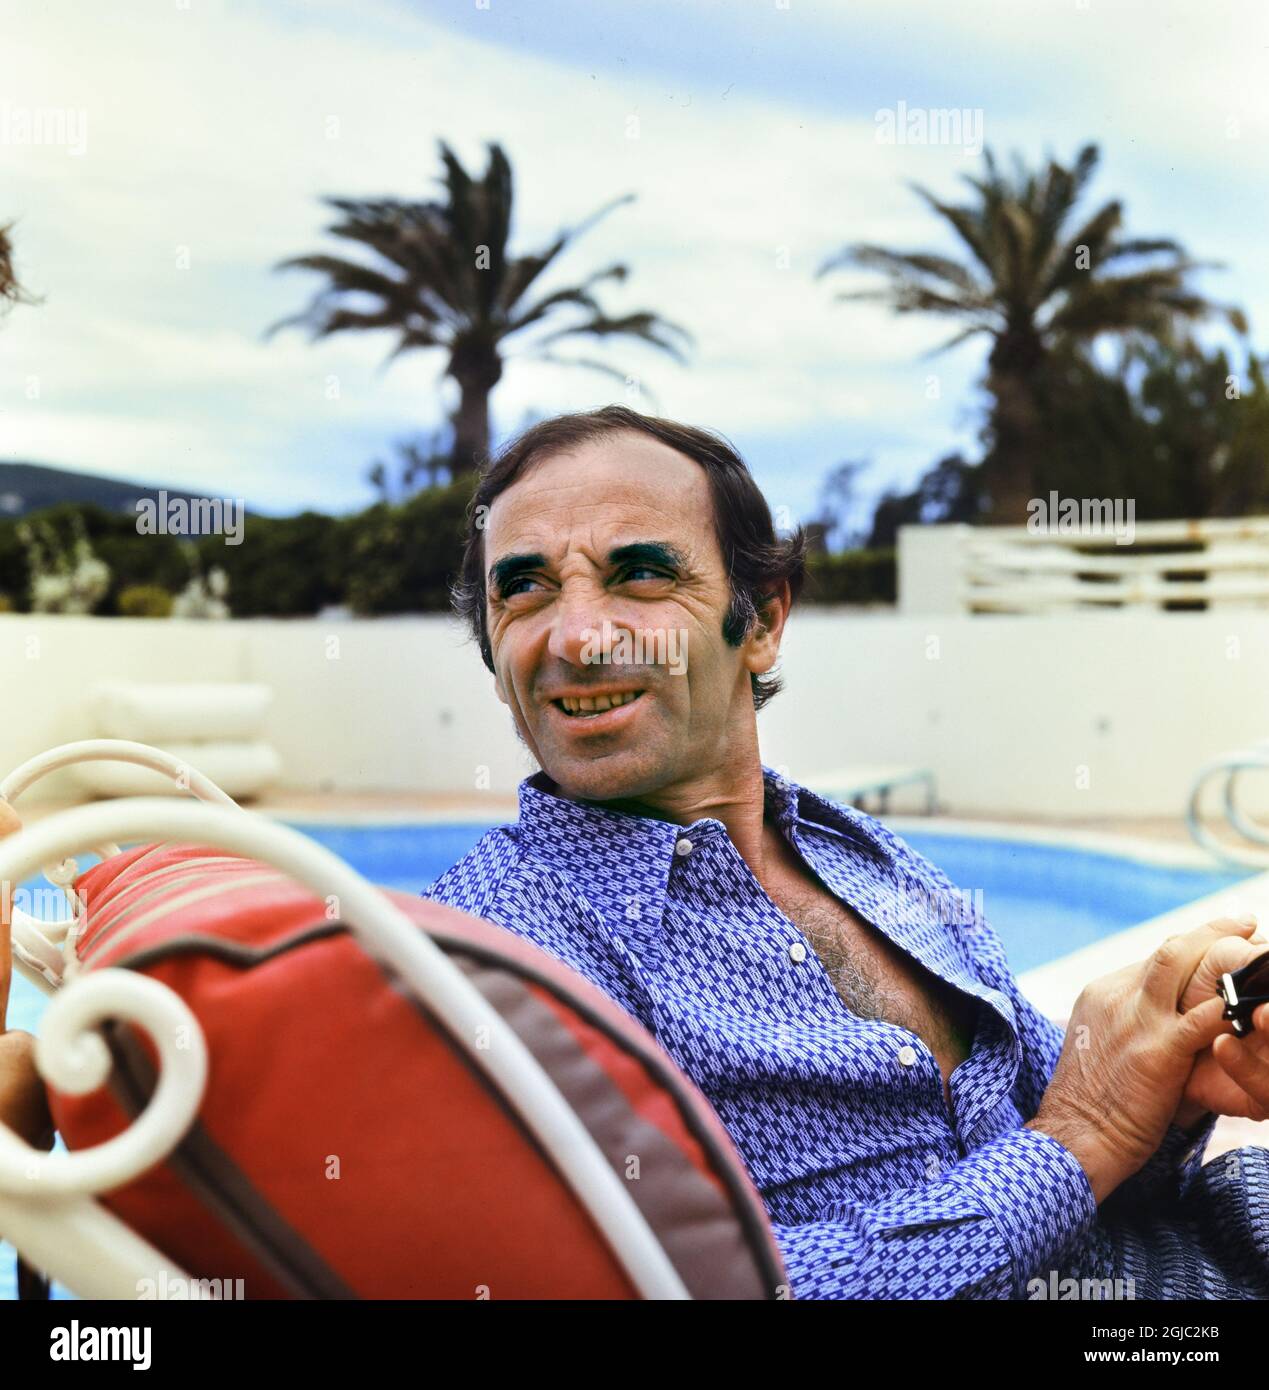 CANNES 1973 French singer Charles Aznavour 1973 in Cannes, France. Photo: Kary Lasch / TT News Agency / Code 4520  Stock Photo